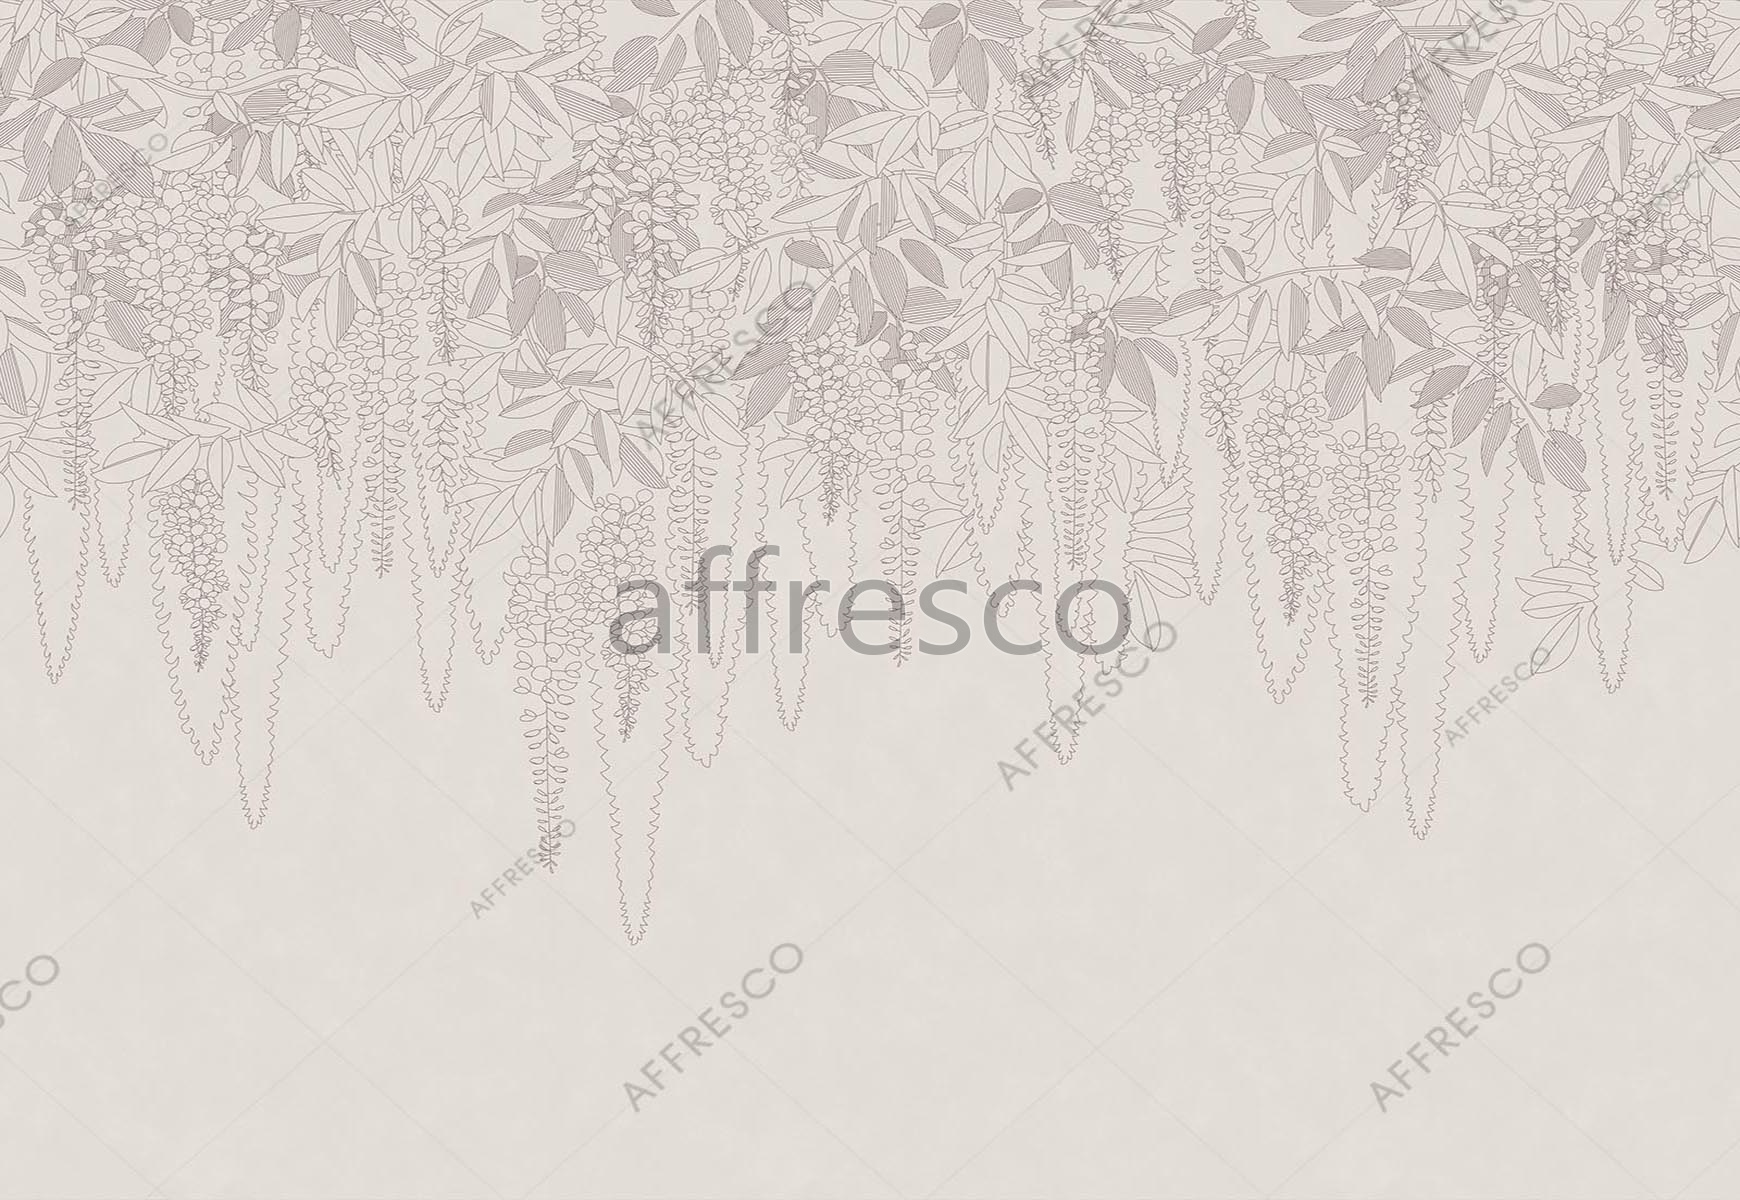 ID139203 | Forest | bunches in bloom | Affresco Factory